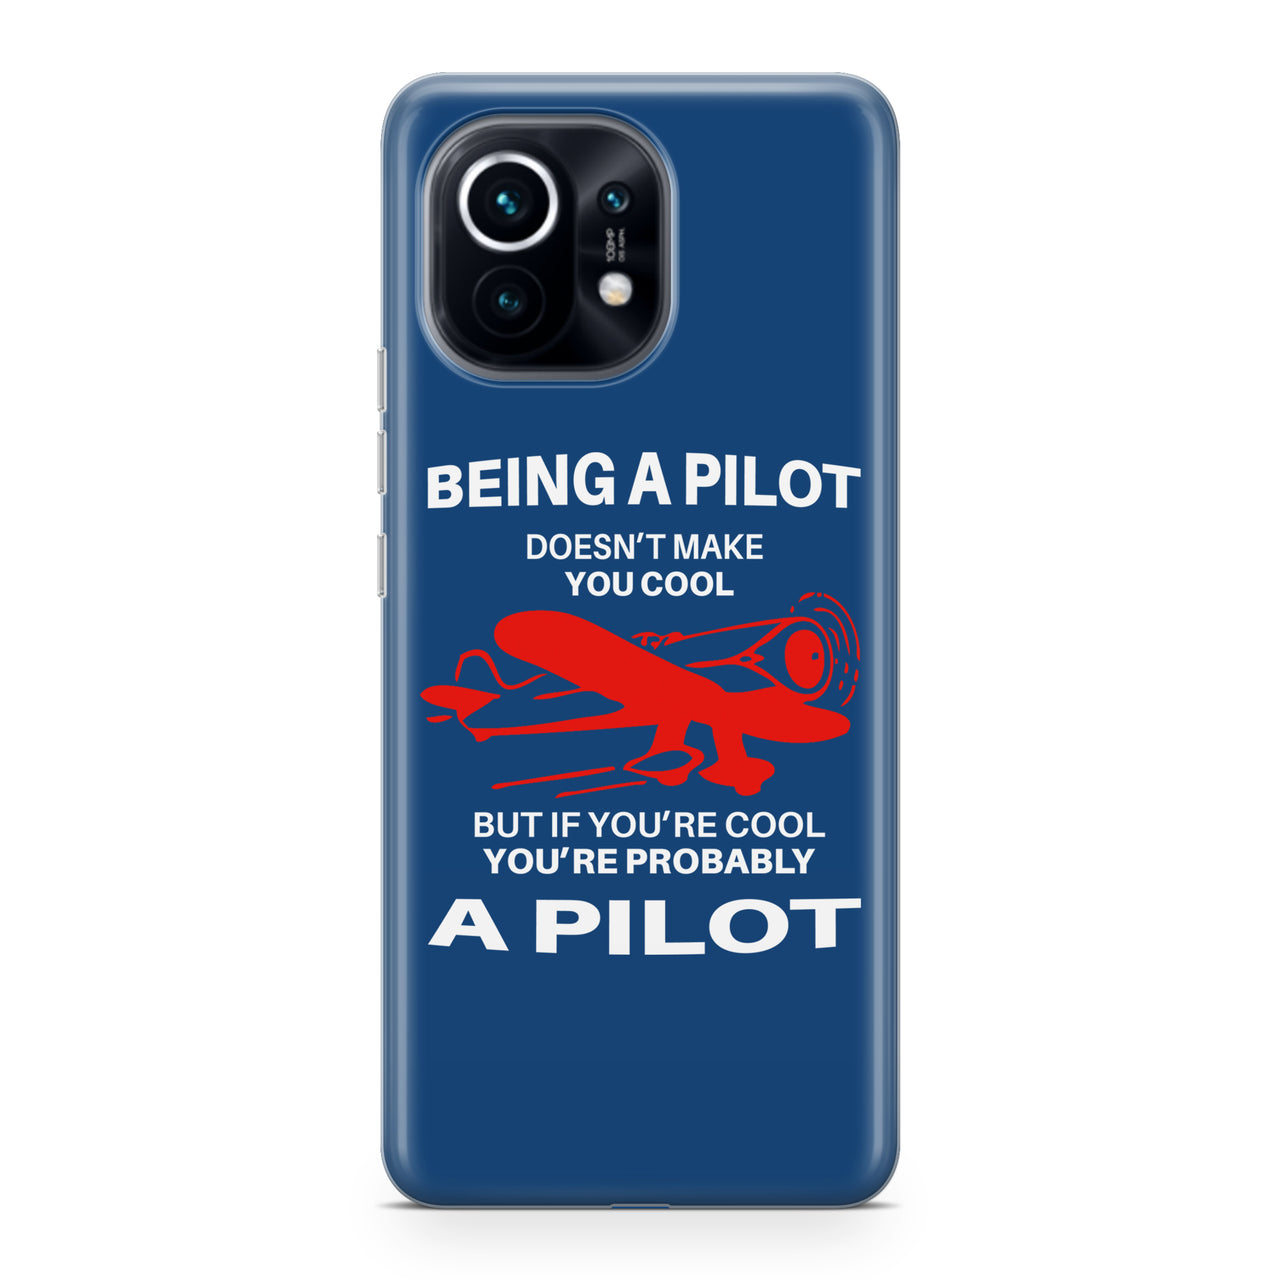 If You're Cool You're Probably a Pilot Designed Xiaomi Cases